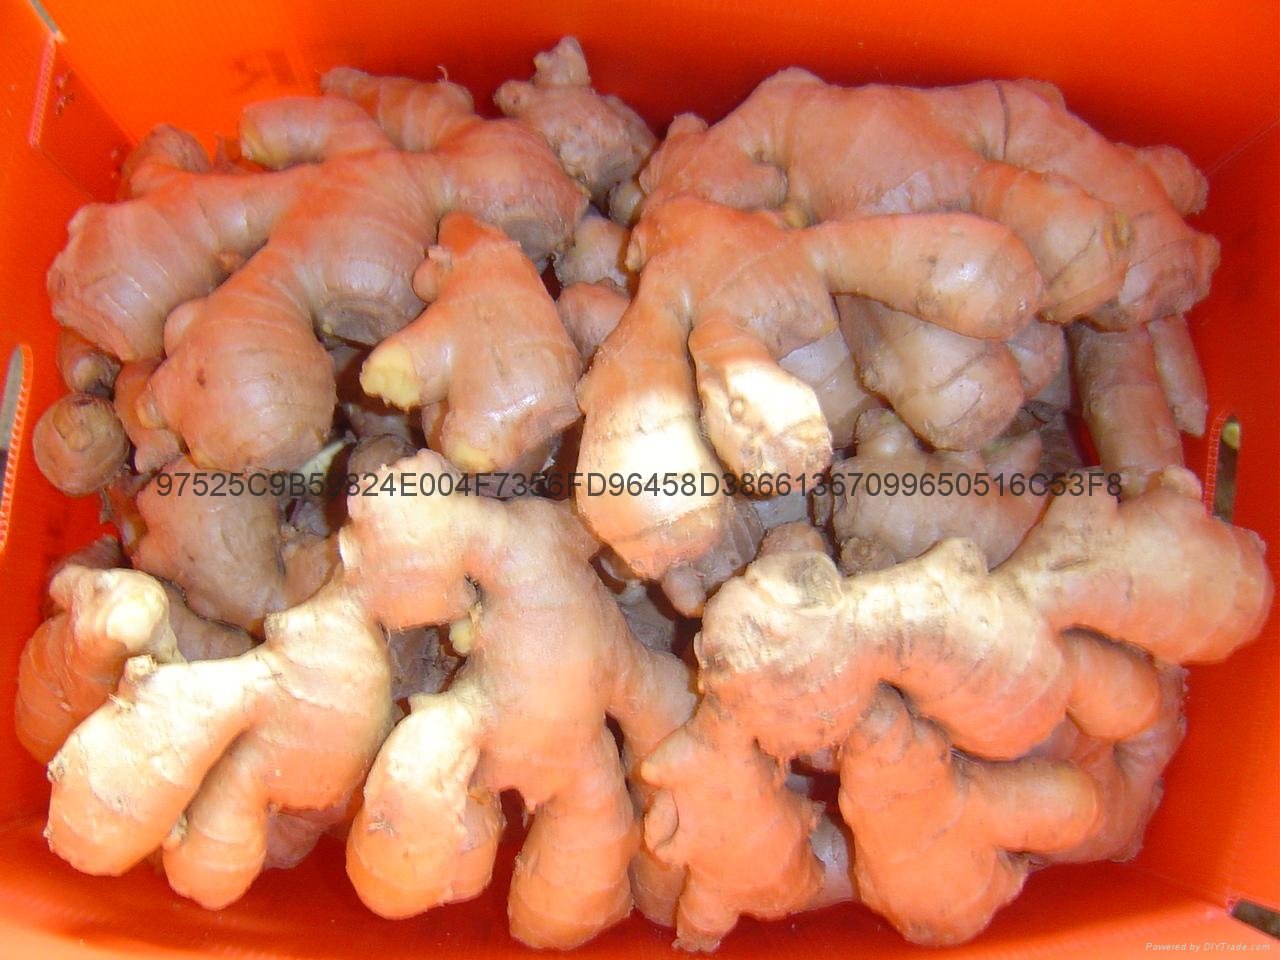  NEW AIR DRIED GINGER 2